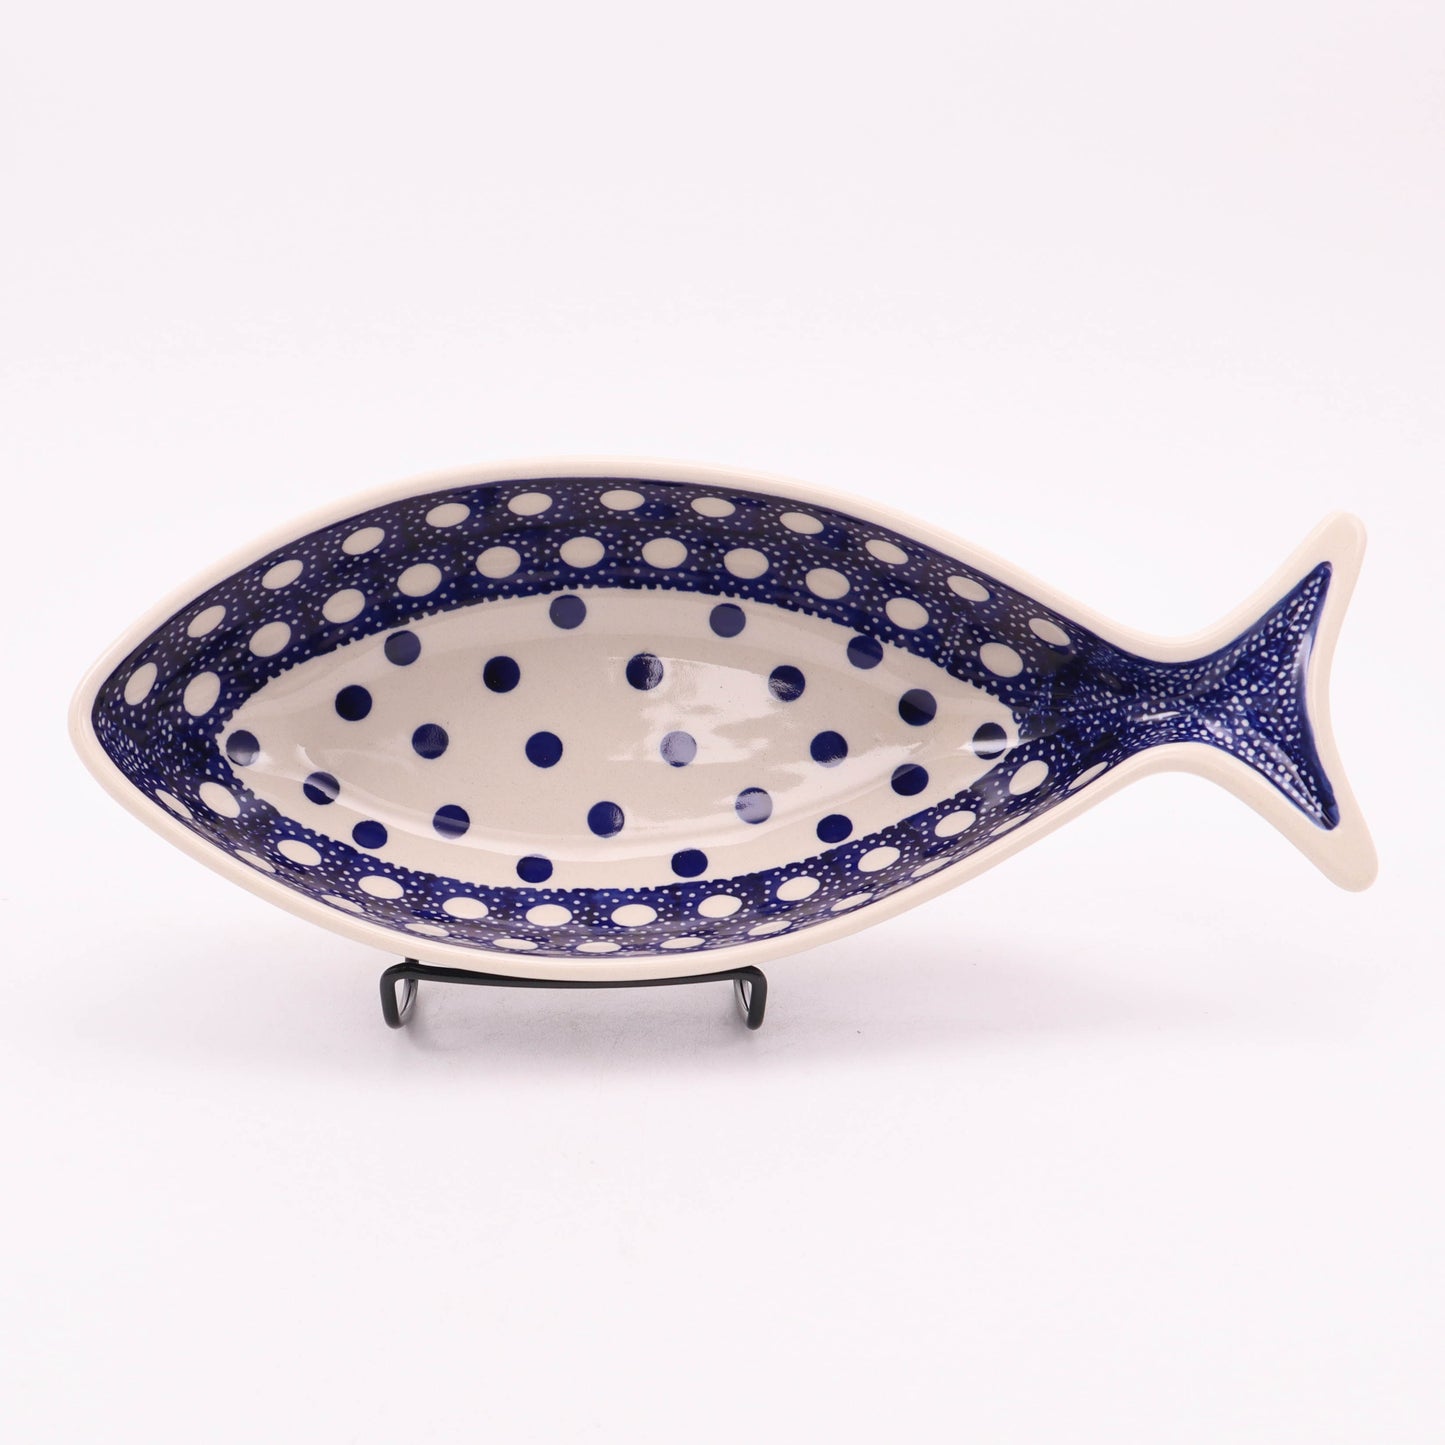 12"x5" Fish Bowl. Pattern: By Design